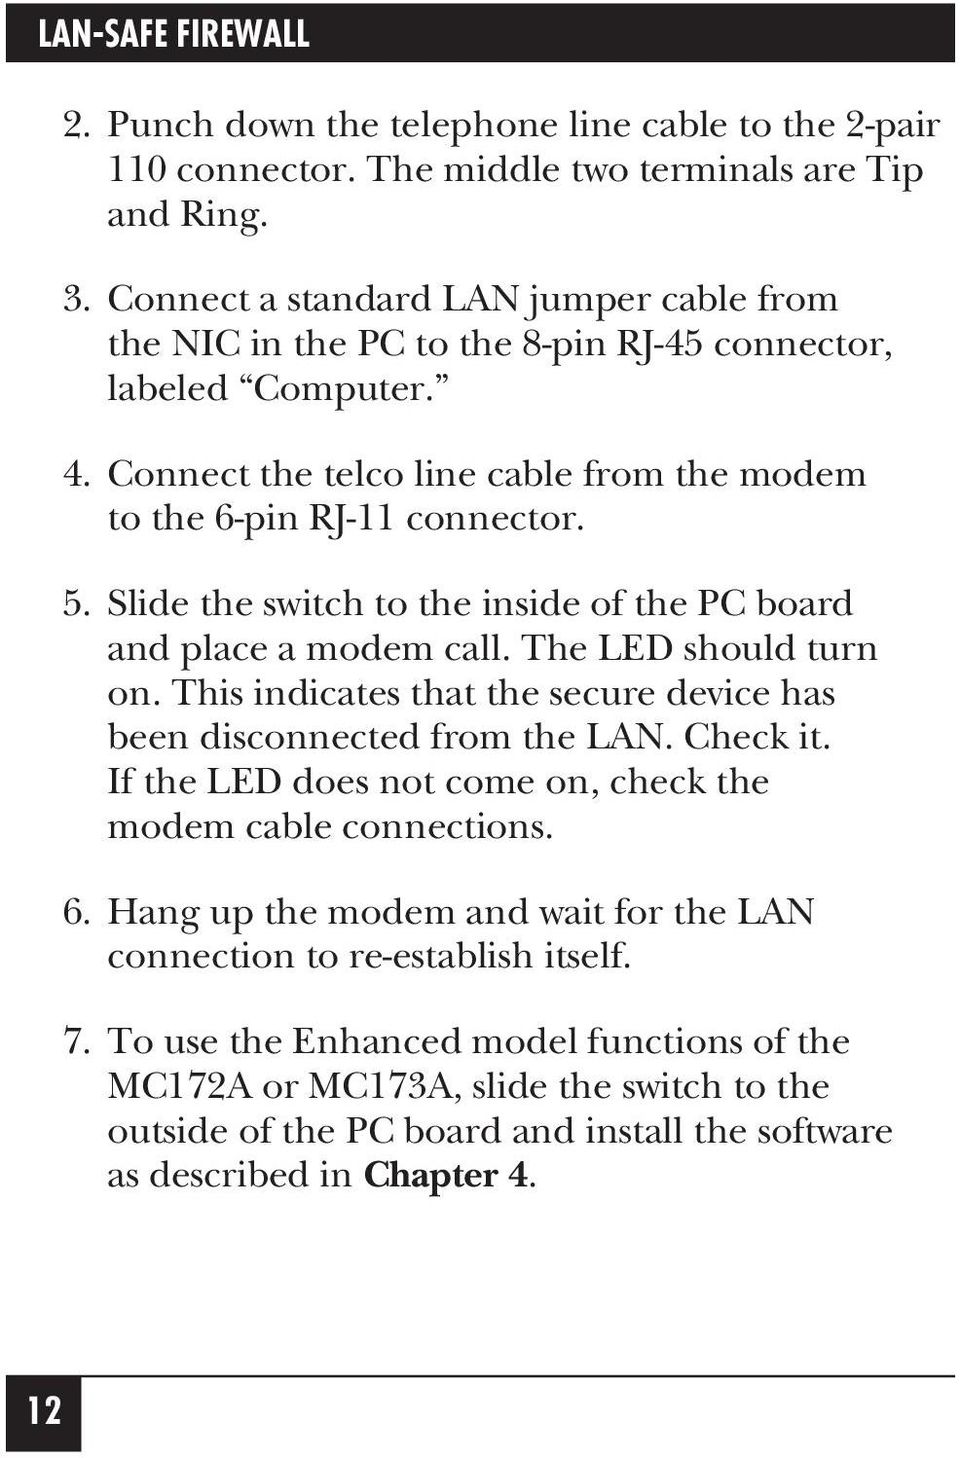 Slide the switch to the inside of the PC board and place a modem call. The LED should turn on. This indicates that the secure device has been disconnected from the LAN. Check it.